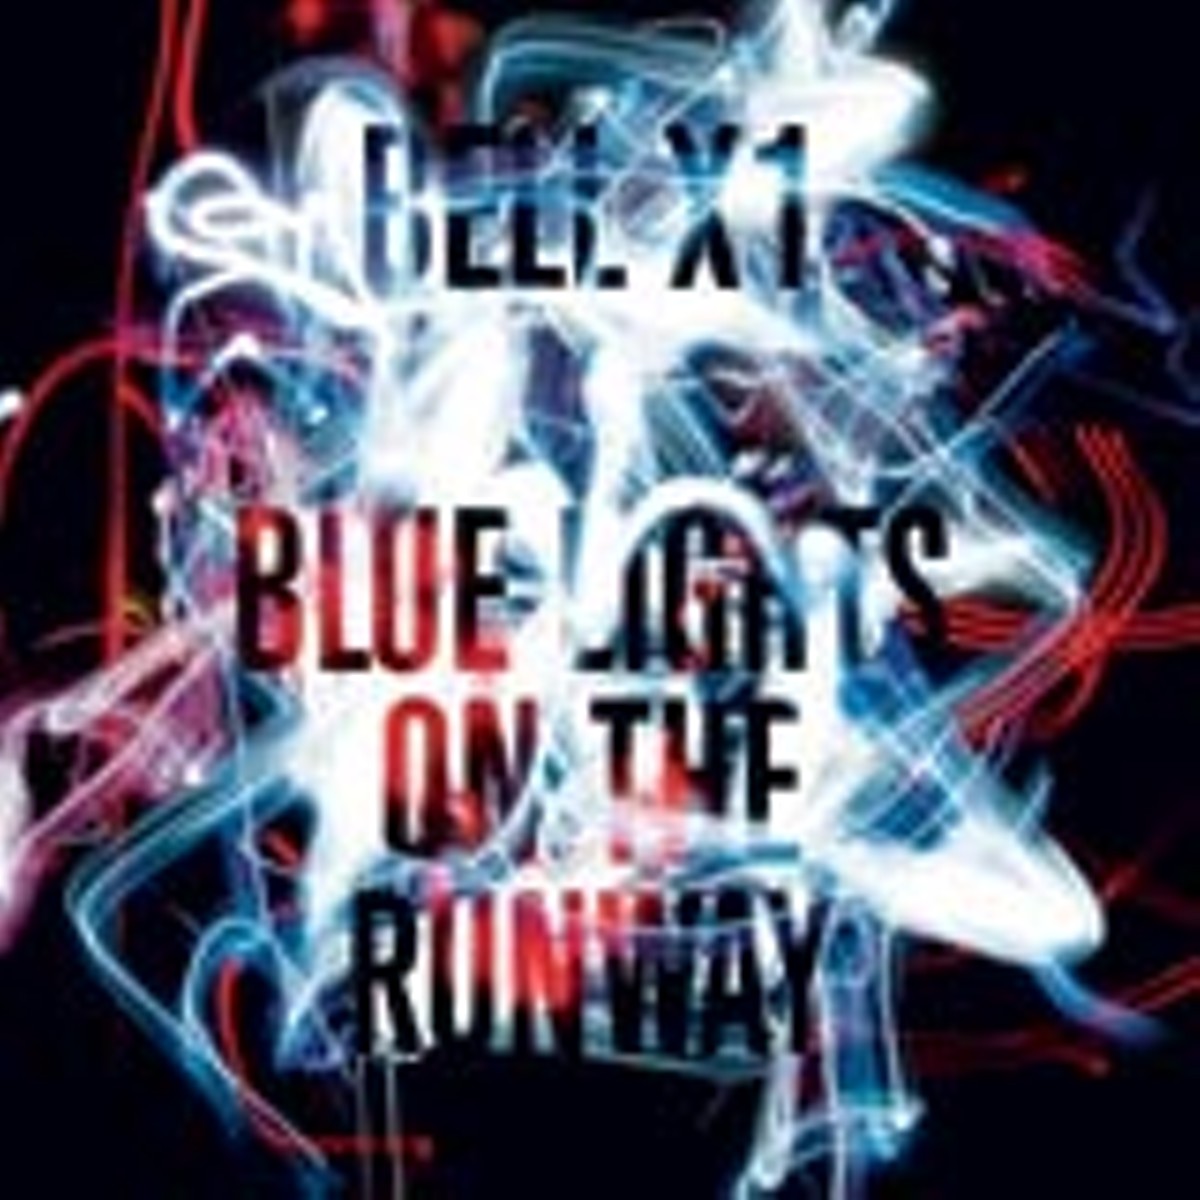 Blue Lights on the Runway